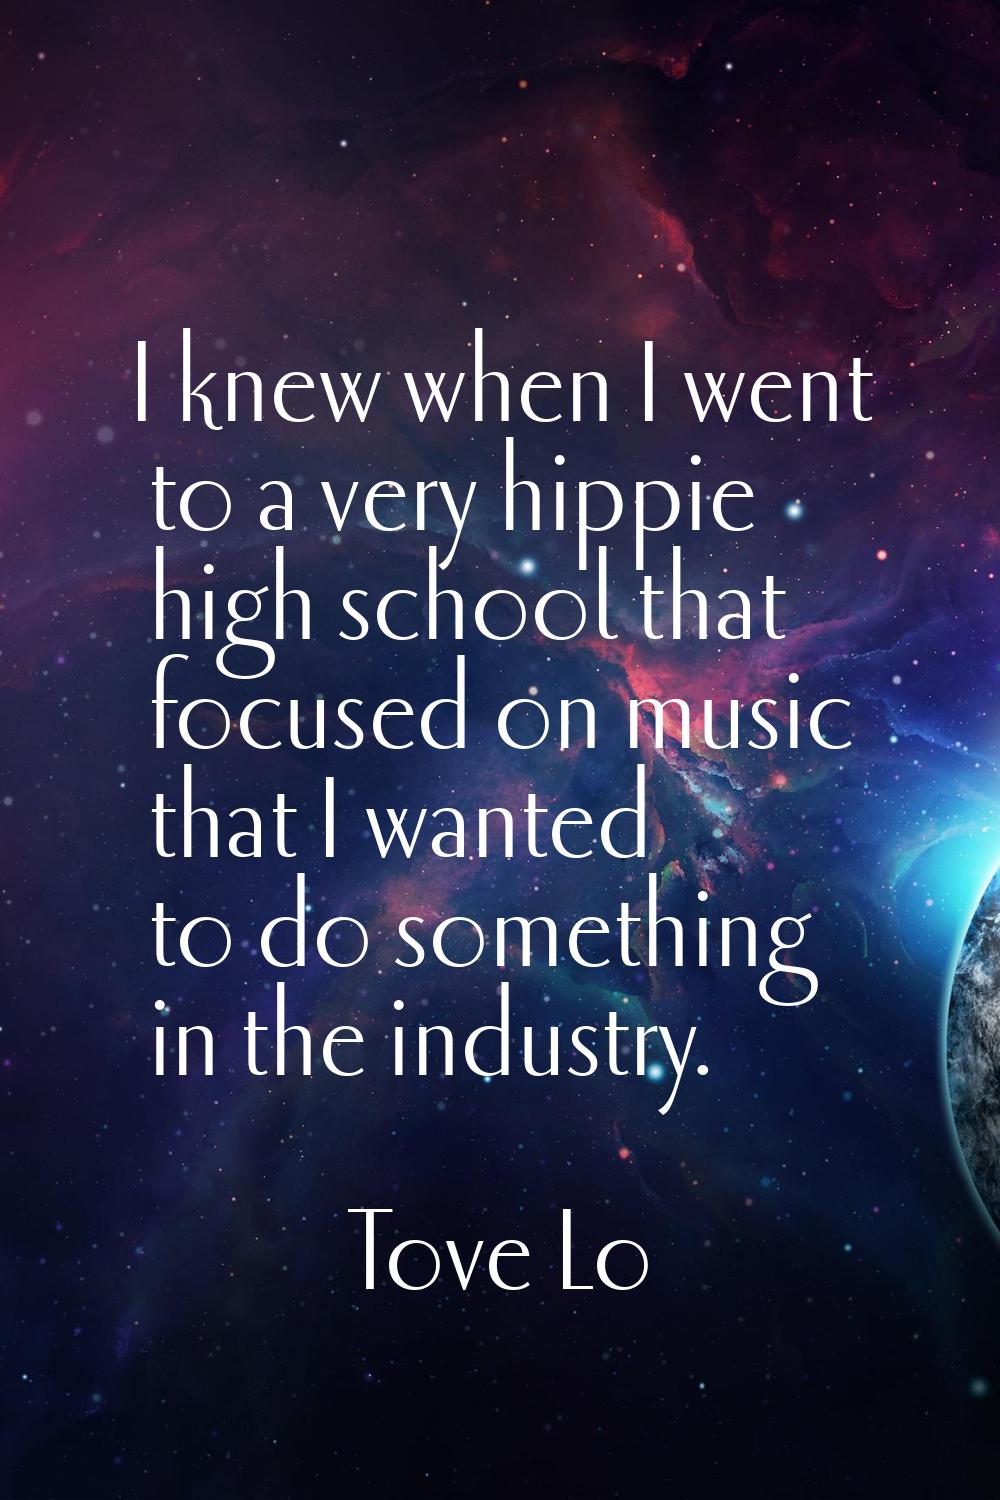 I knew when I went to a very hippie high school that focused on music that I wanted to do something